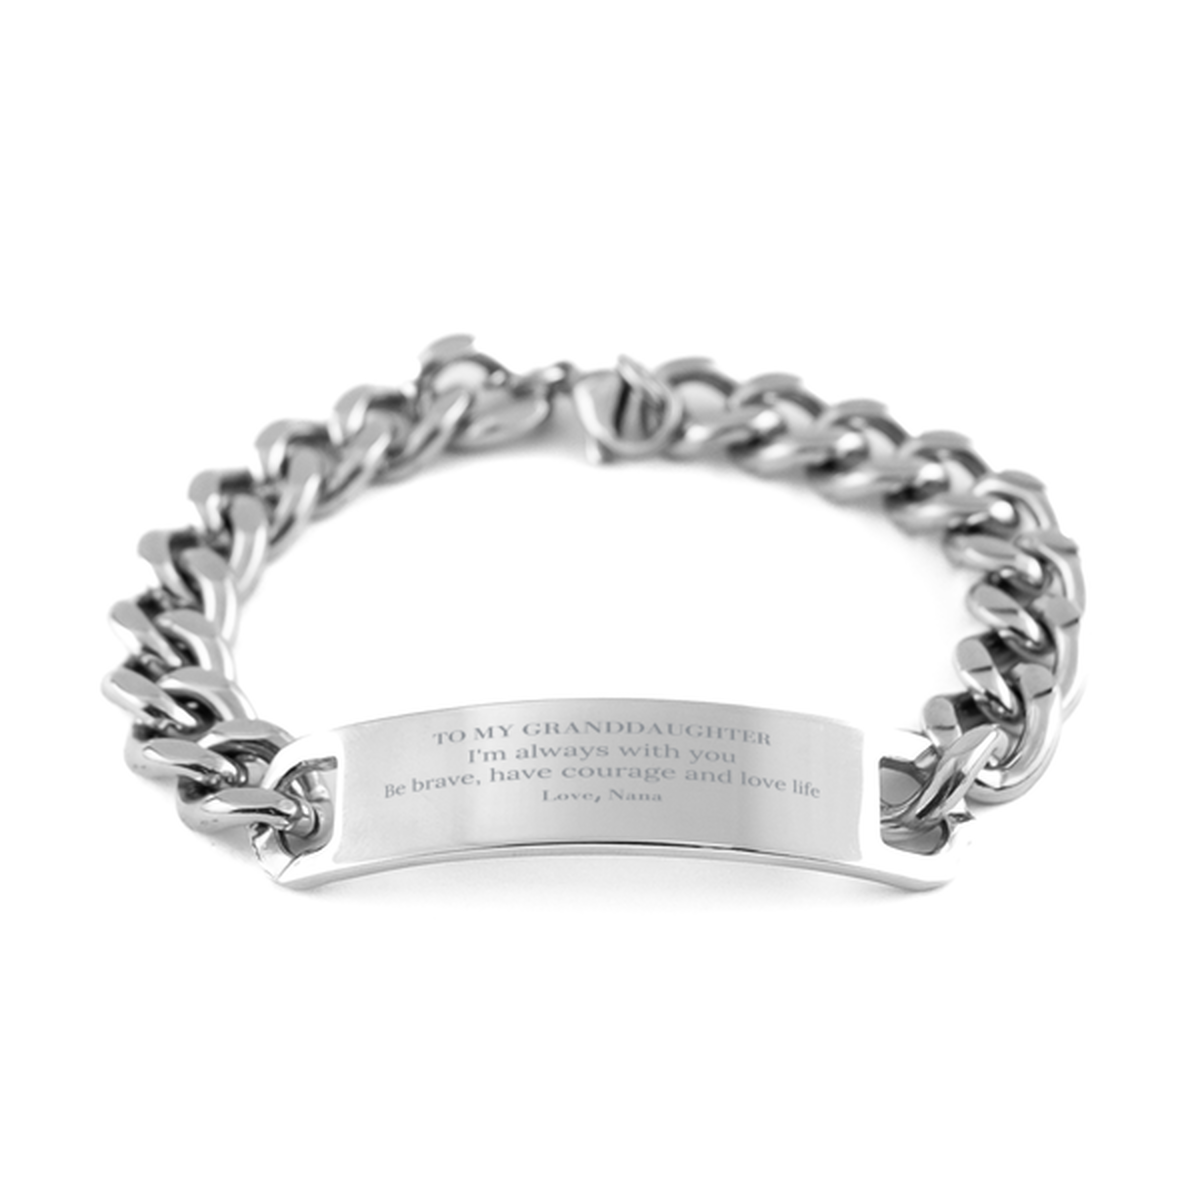 To My Granddaughter Gifts from Nana, Unique Cuban Chain Stainless Steel Bracelet Inspirational Christmas Birthday Graduation Gifts for Granddaughter I'm always with you. Be brave, have courage and love life. Love, Nana